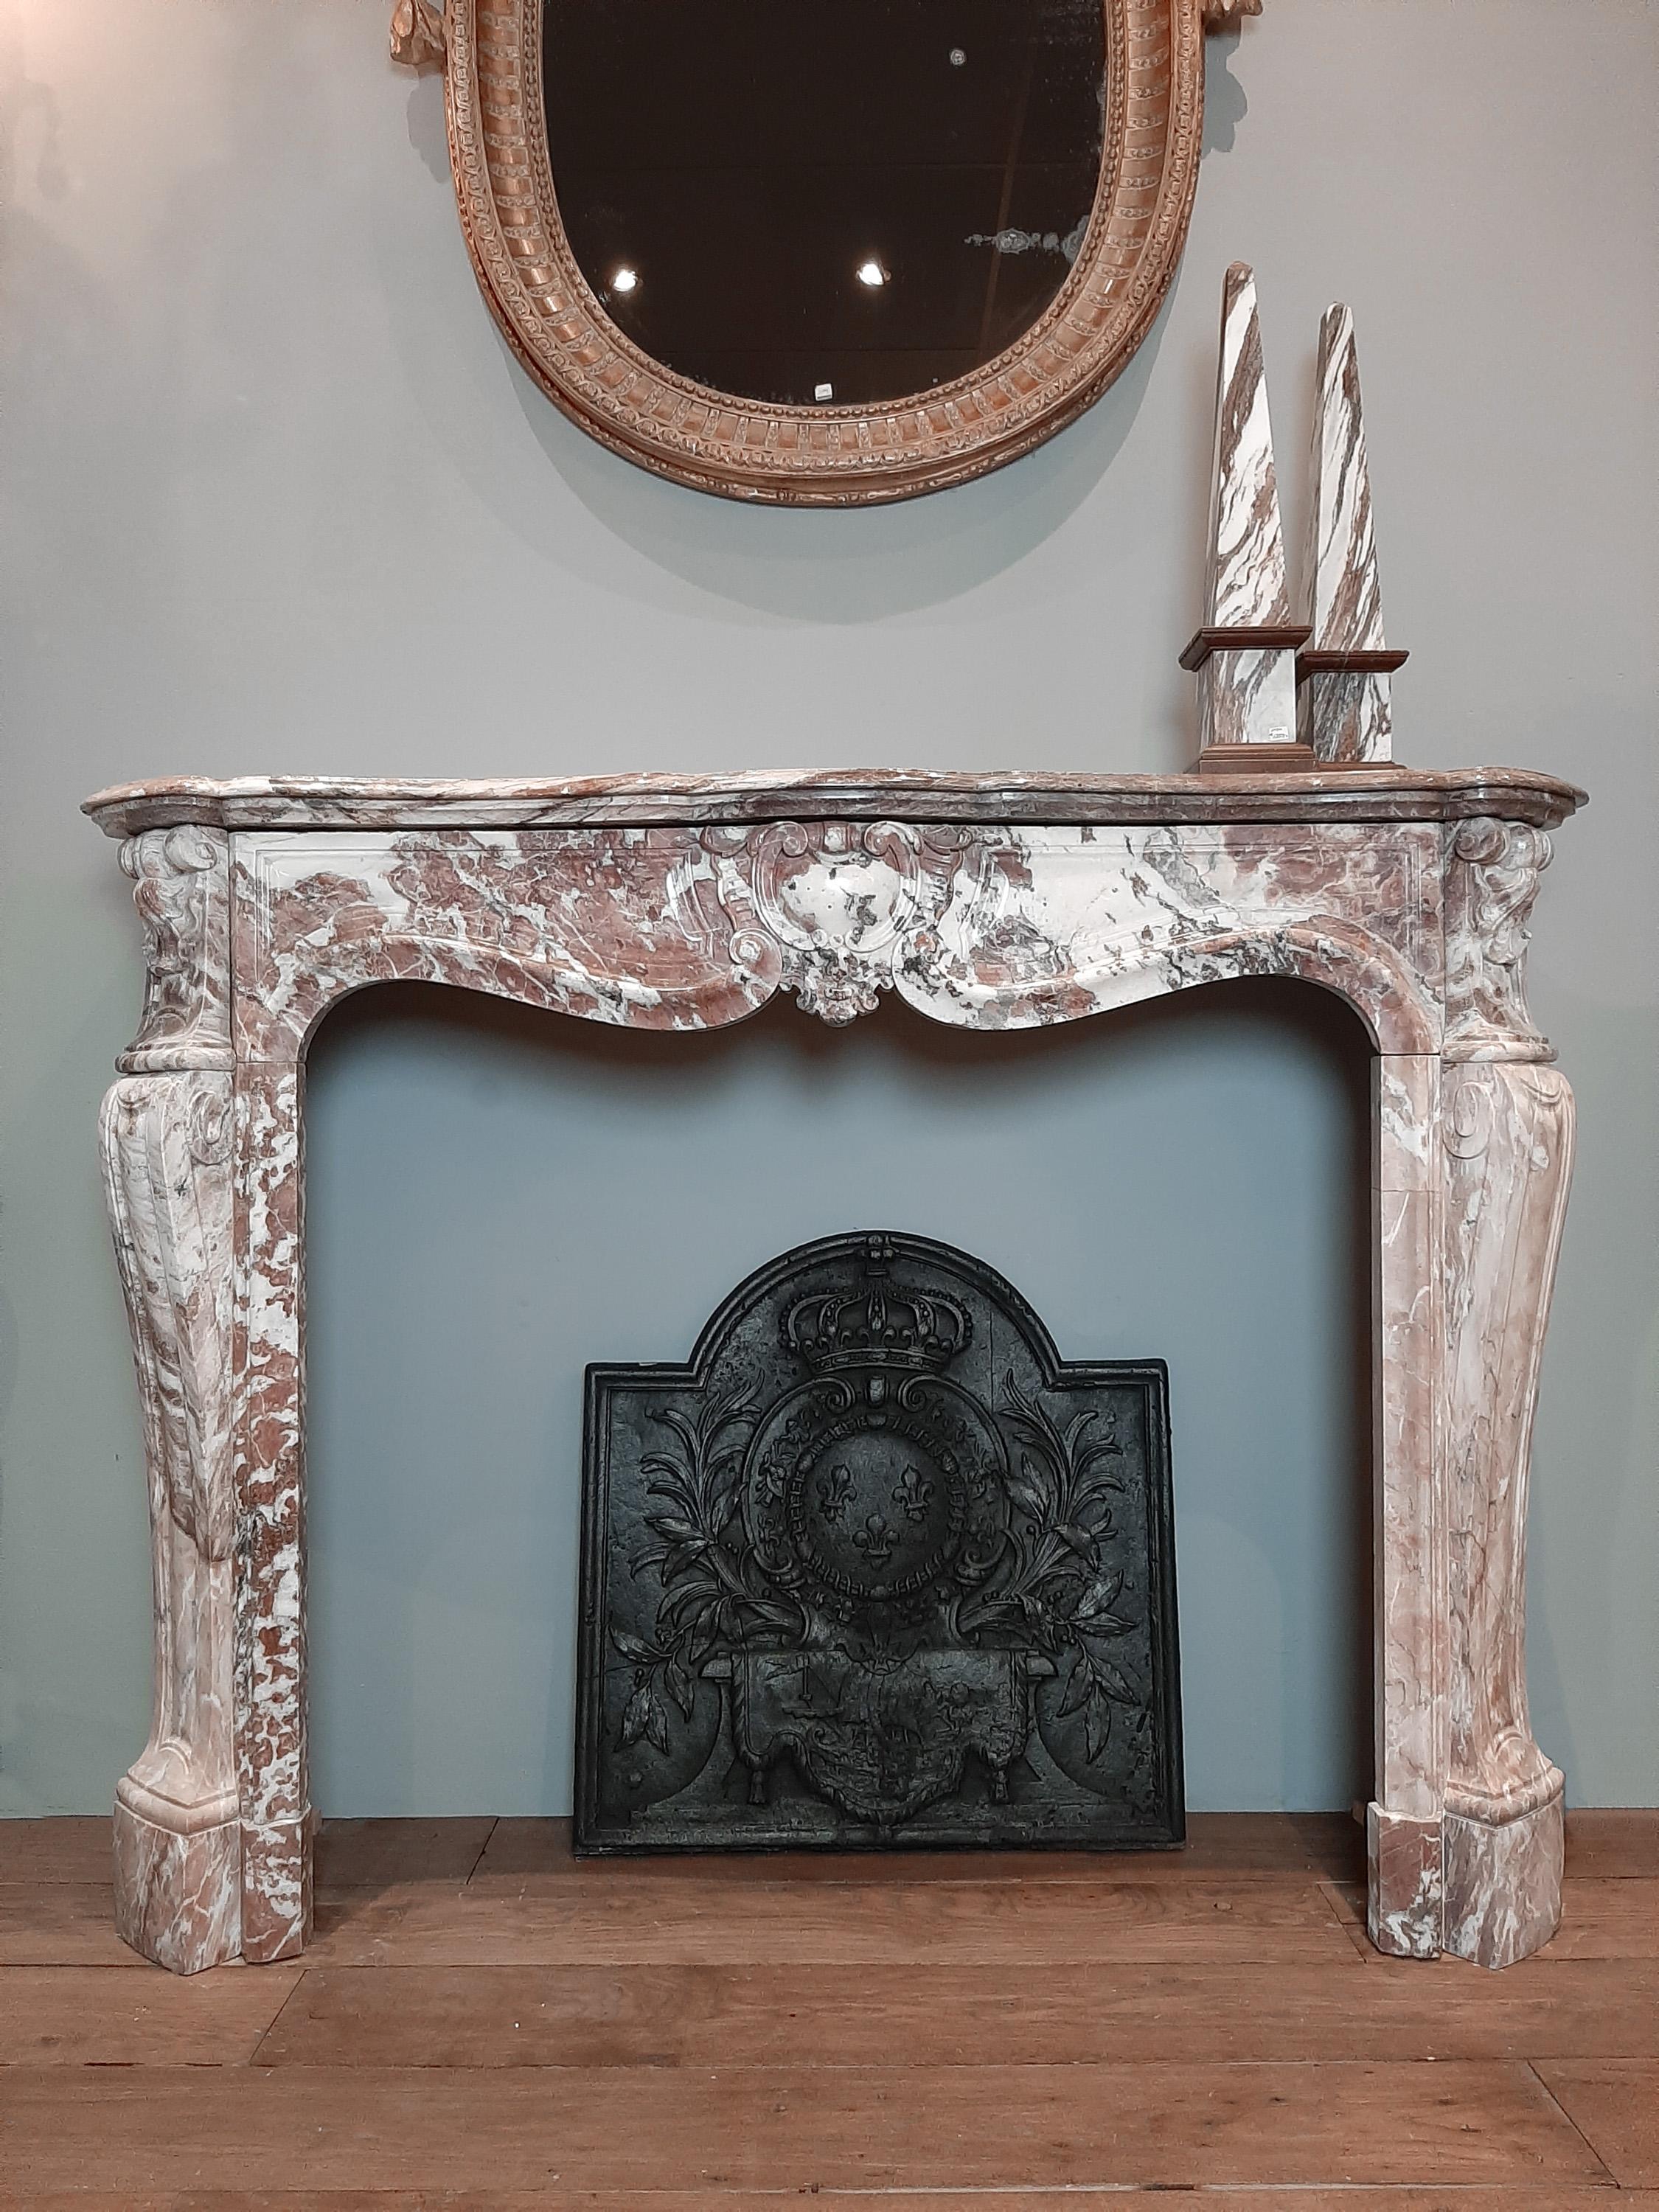 Antique French trois coquilles fireplace in pink and white color tones. This mantel (fireplace) piece gets it's lovely coloring from the Violet de Villette marble.

Dimensions: H 111 x W 142 x D 40 cm
Inside dimensions: H 90 x W 102 cm.